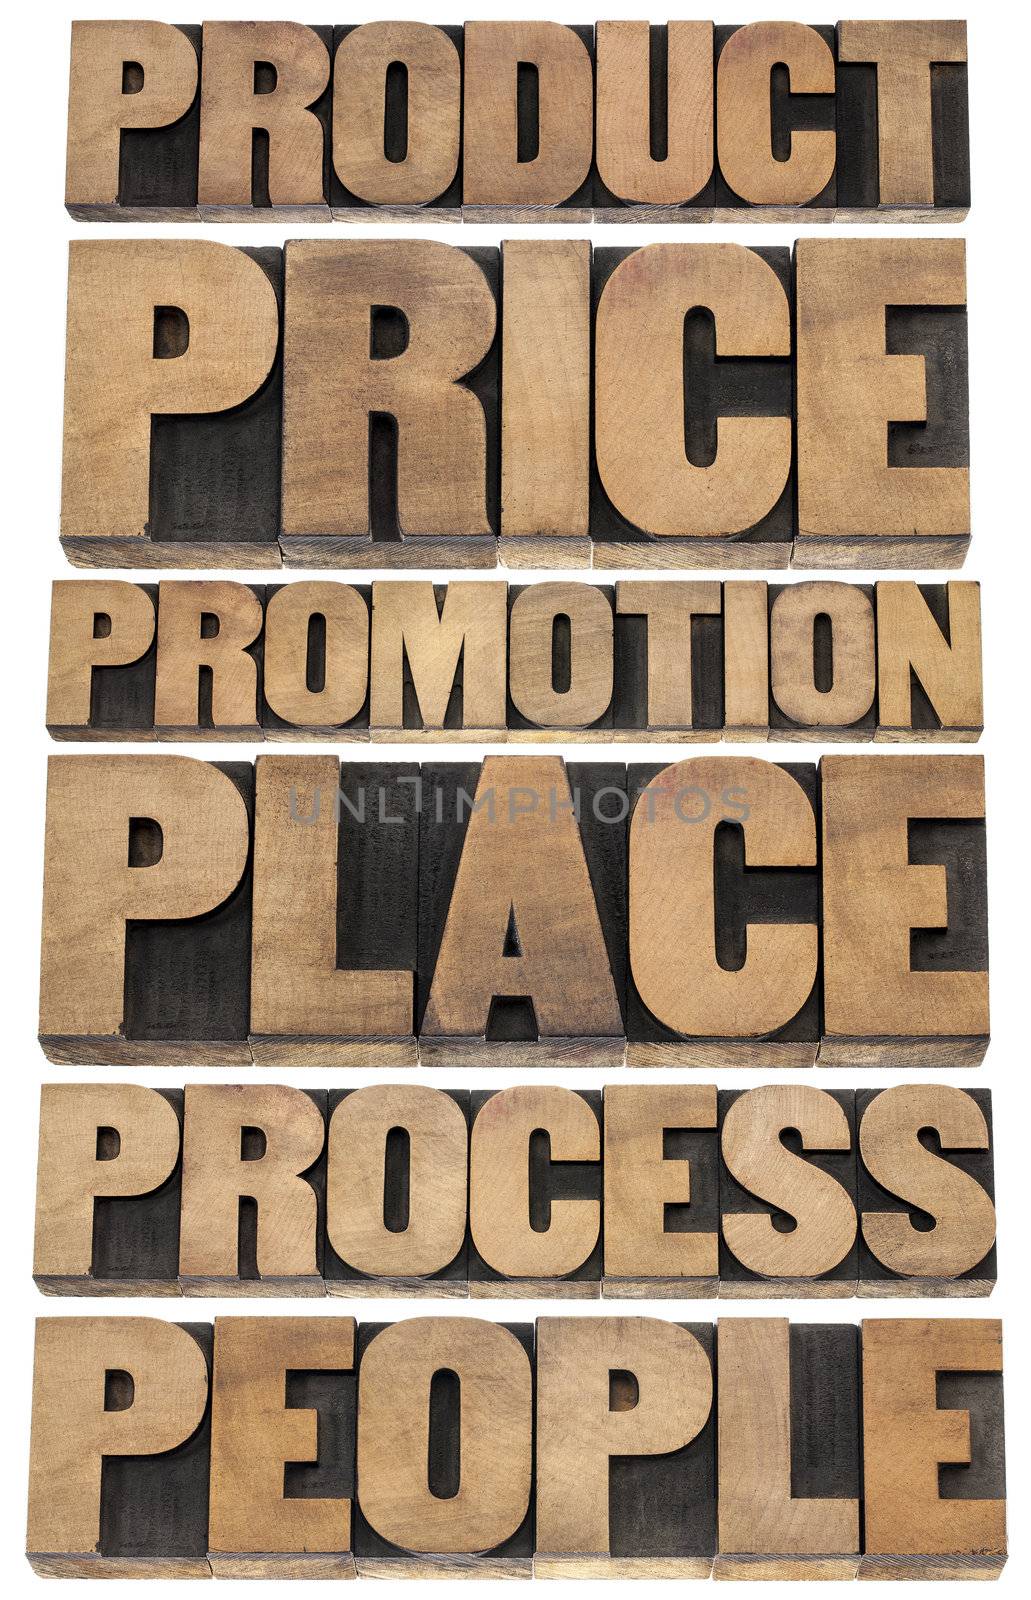 marketing strategy concept - 6P of marketing - product, price, promotion, place, process, people - collage of isolated words in vintage letterpress wood type blocks